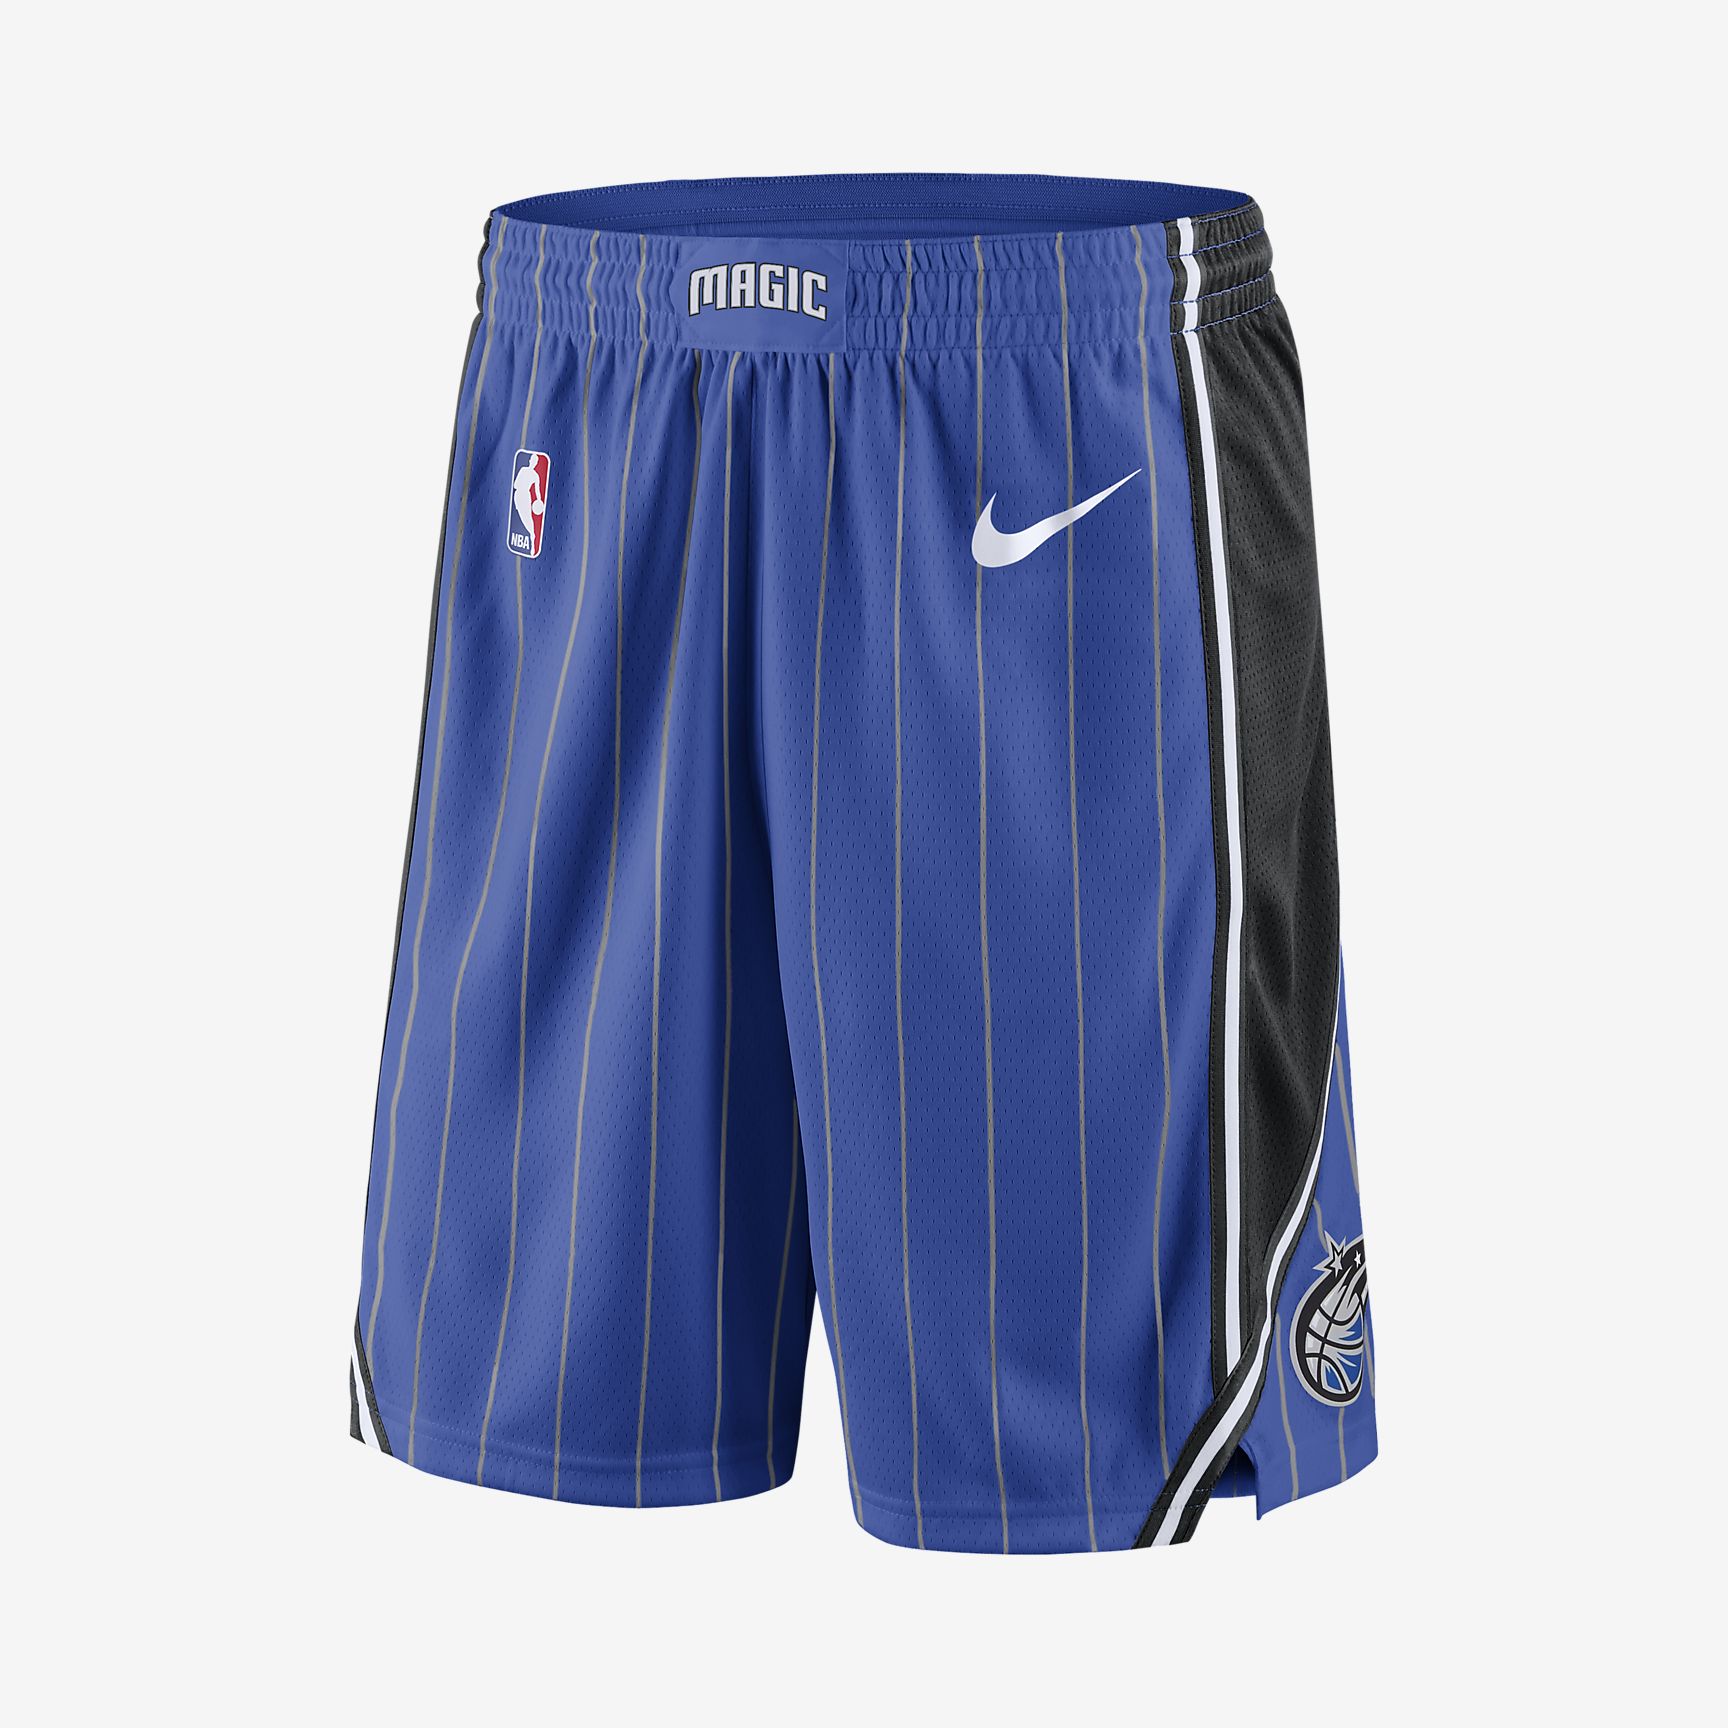 NBA team shorts are the wave this summer | Sports, Hip Hop & Piff - The ...